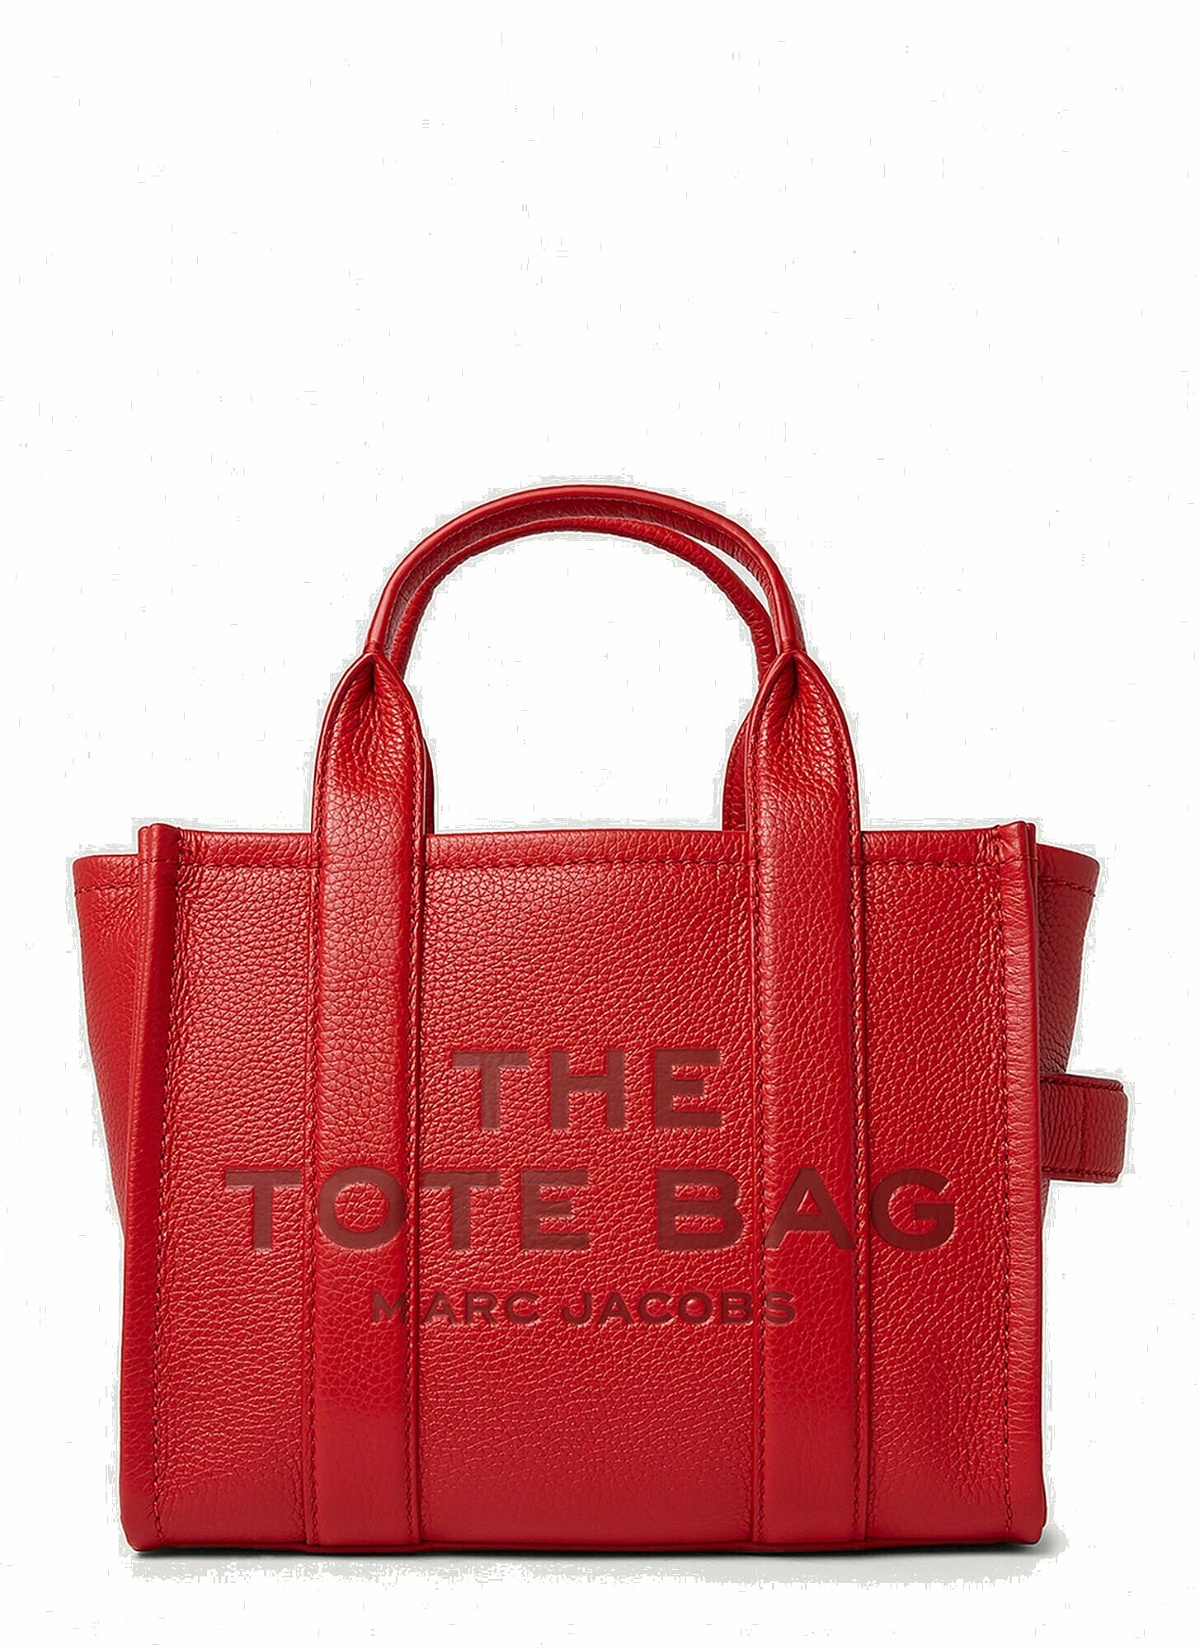 Mini Tote Bag in Red Marc Jacobs